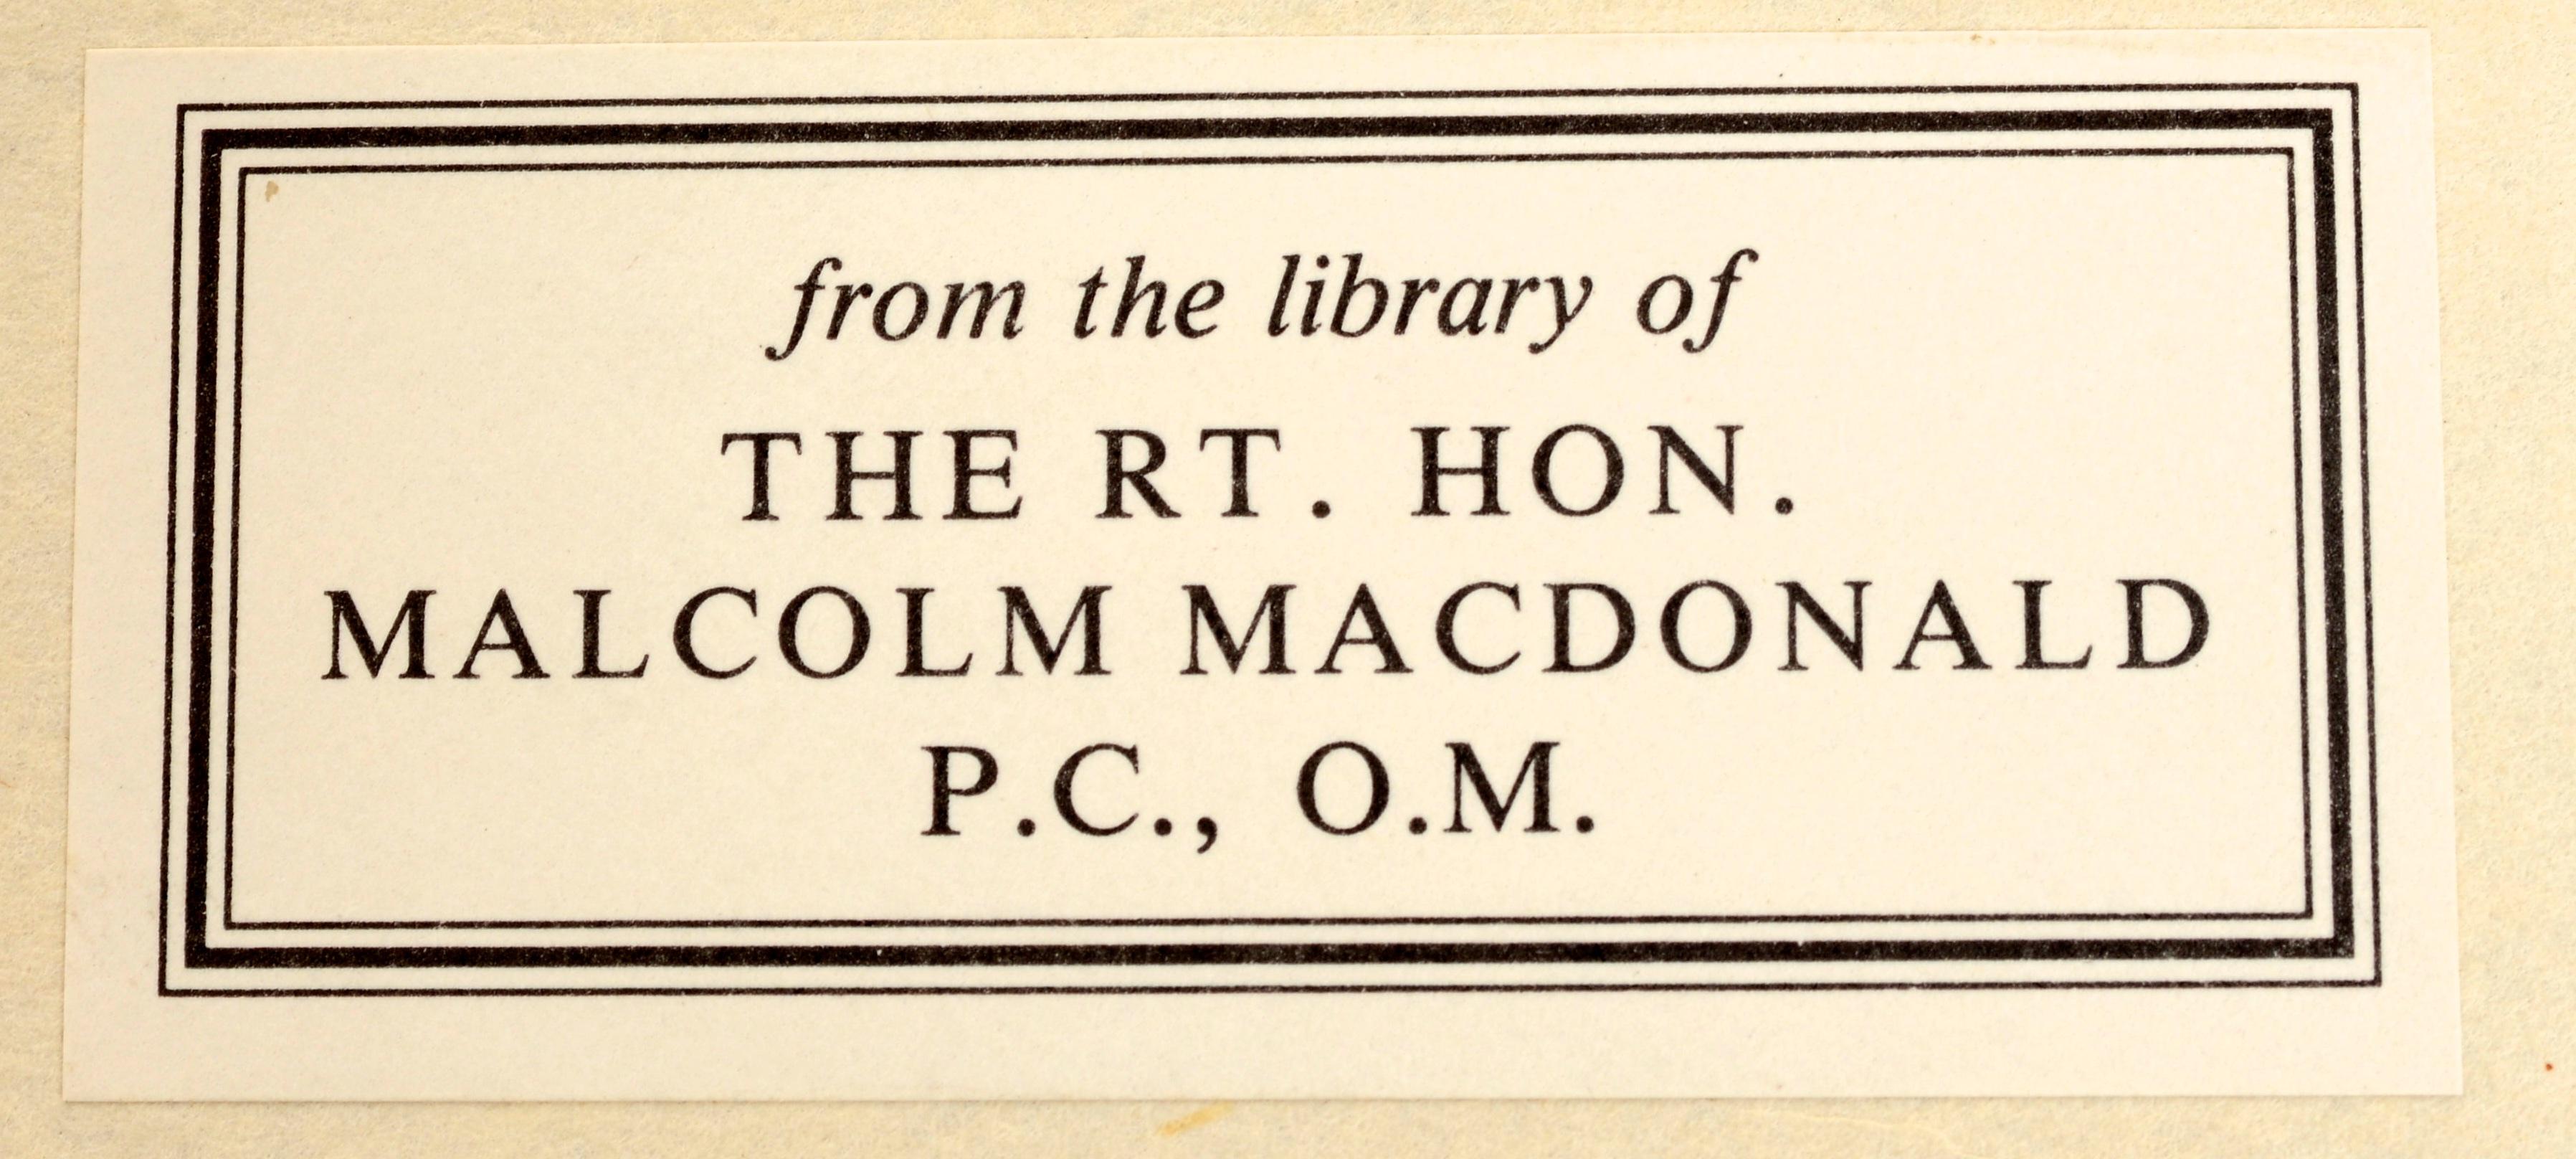 Old English Furniture its true value and function, by H. Avray Tipping With an Important Bookplate of The Right Honorable Malcolm John MacDonald PC OM, (1901 – 1981) who was a British politician and diplomat. He was born to future Prime Minister